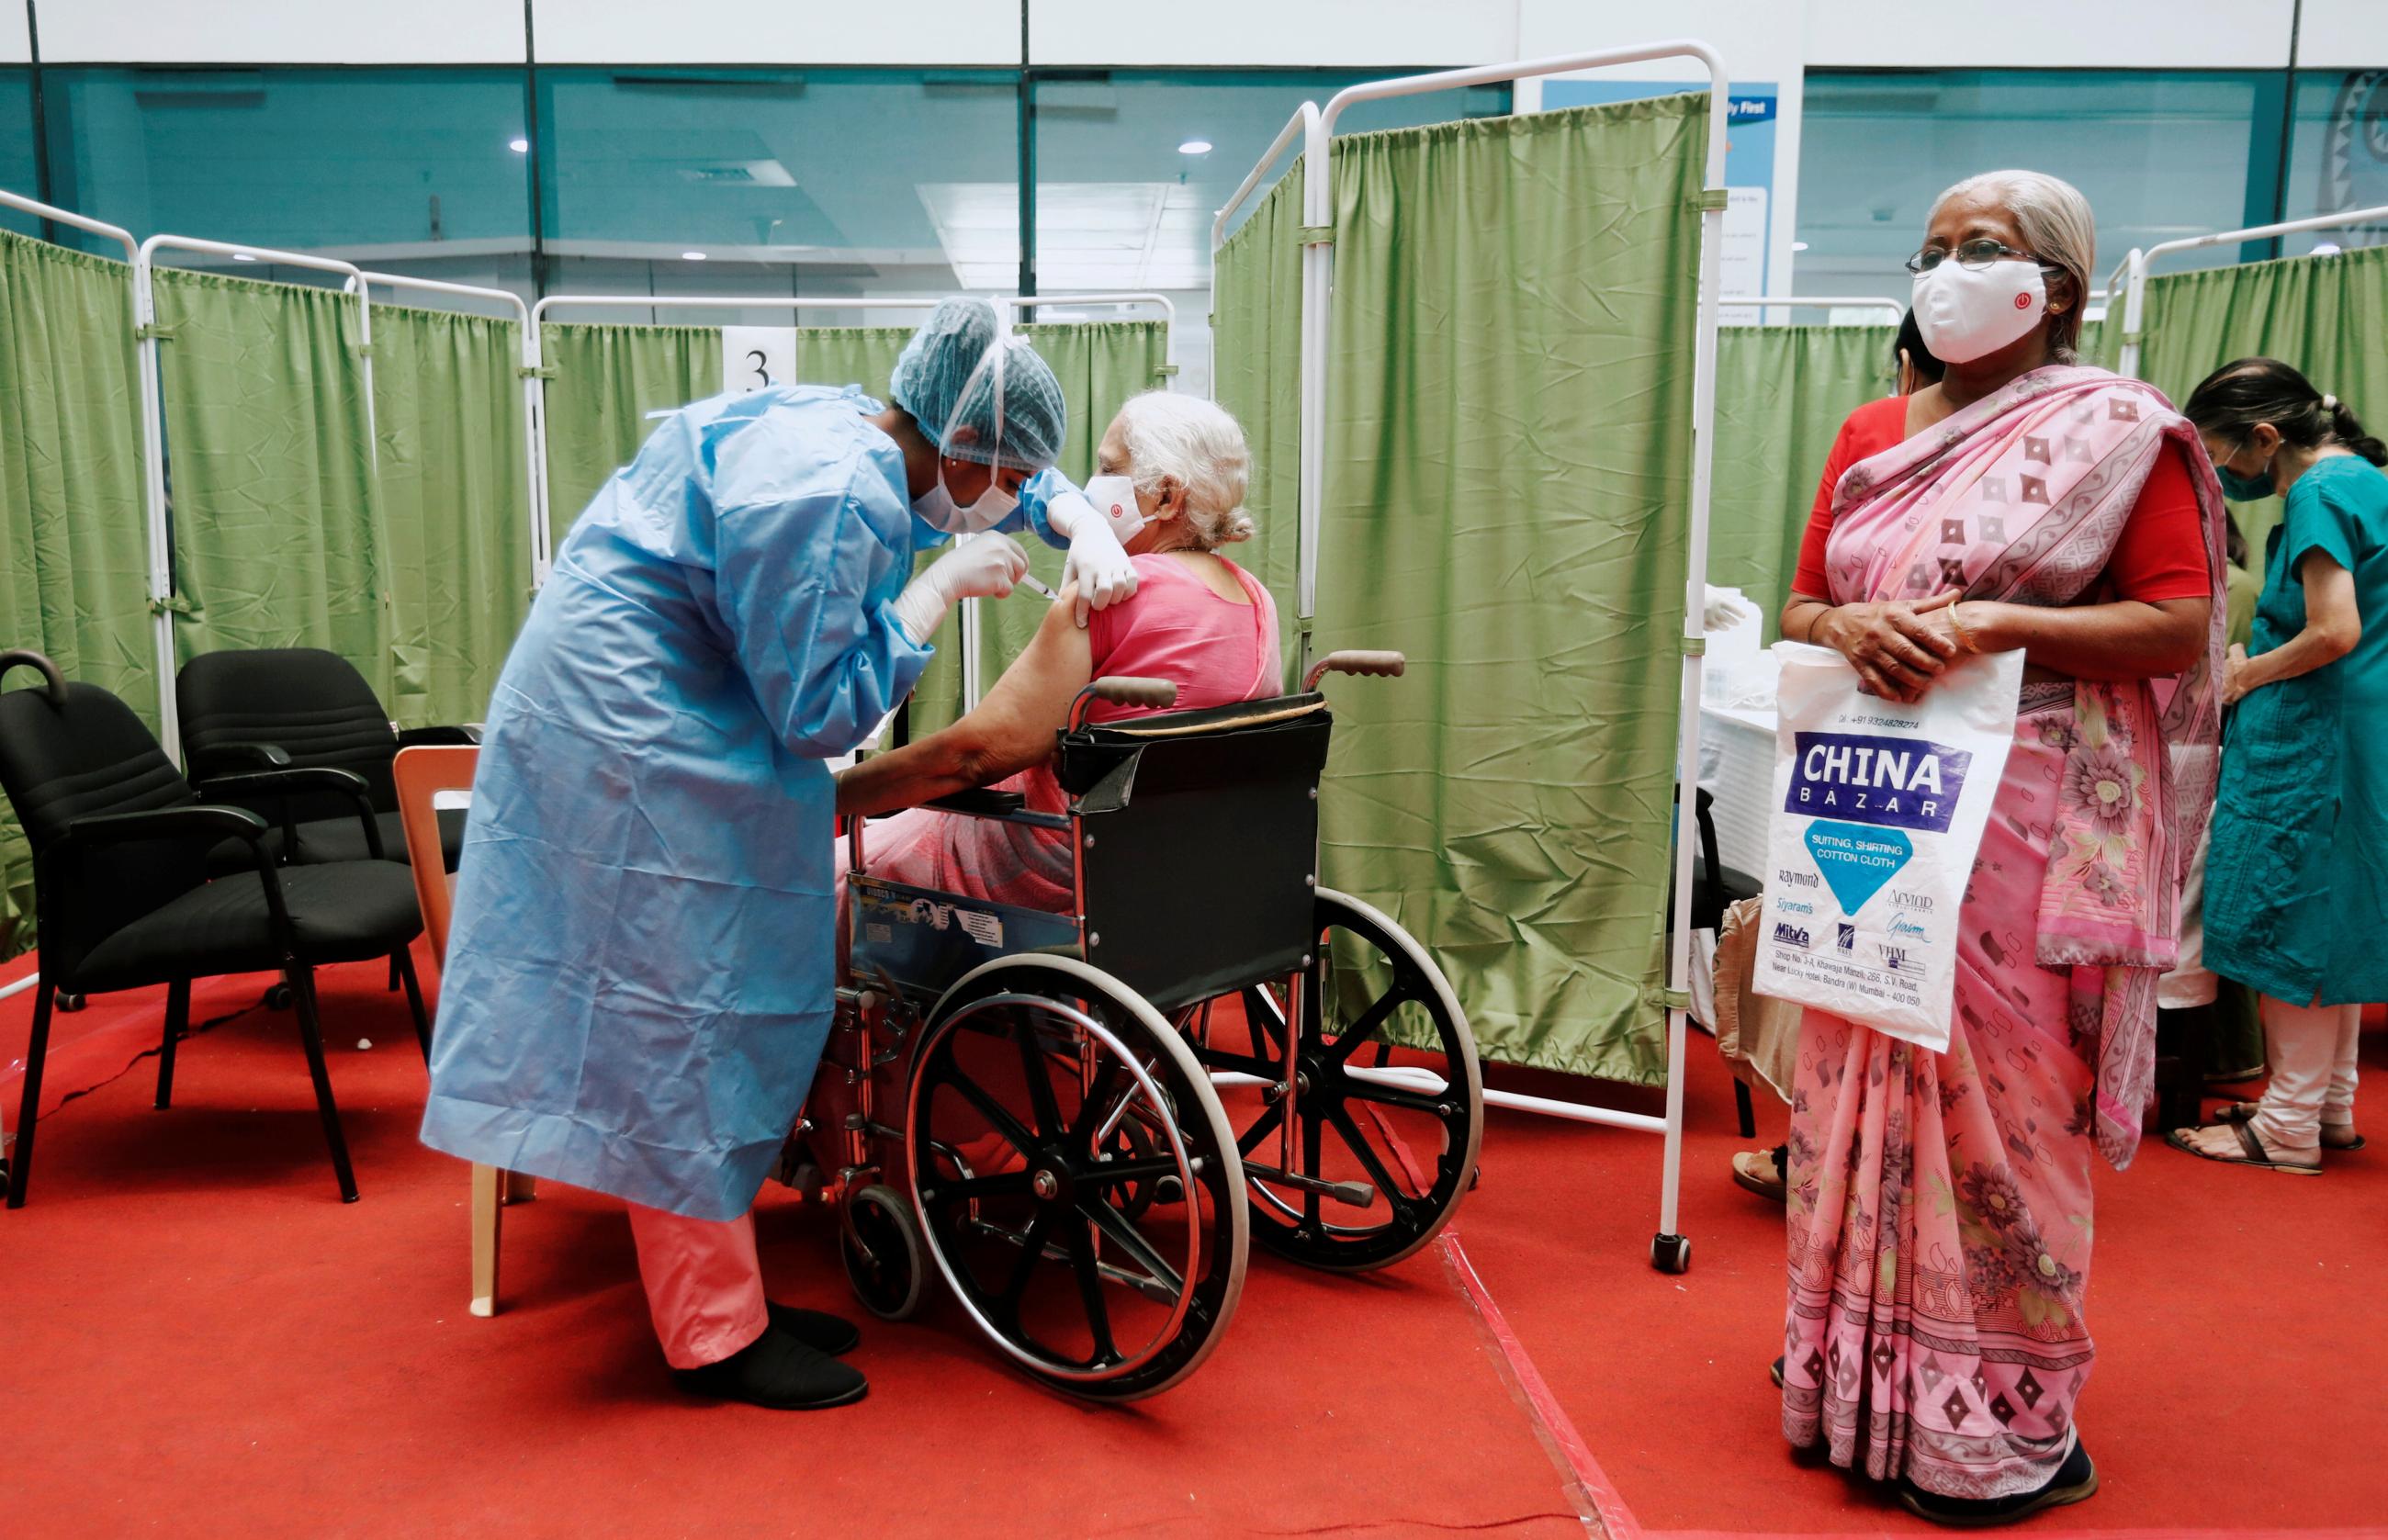 A woman on a wheelchair receives a dose of COVISHIELD, a COVID-19 vaccine manufactured by Serum Institute of India.